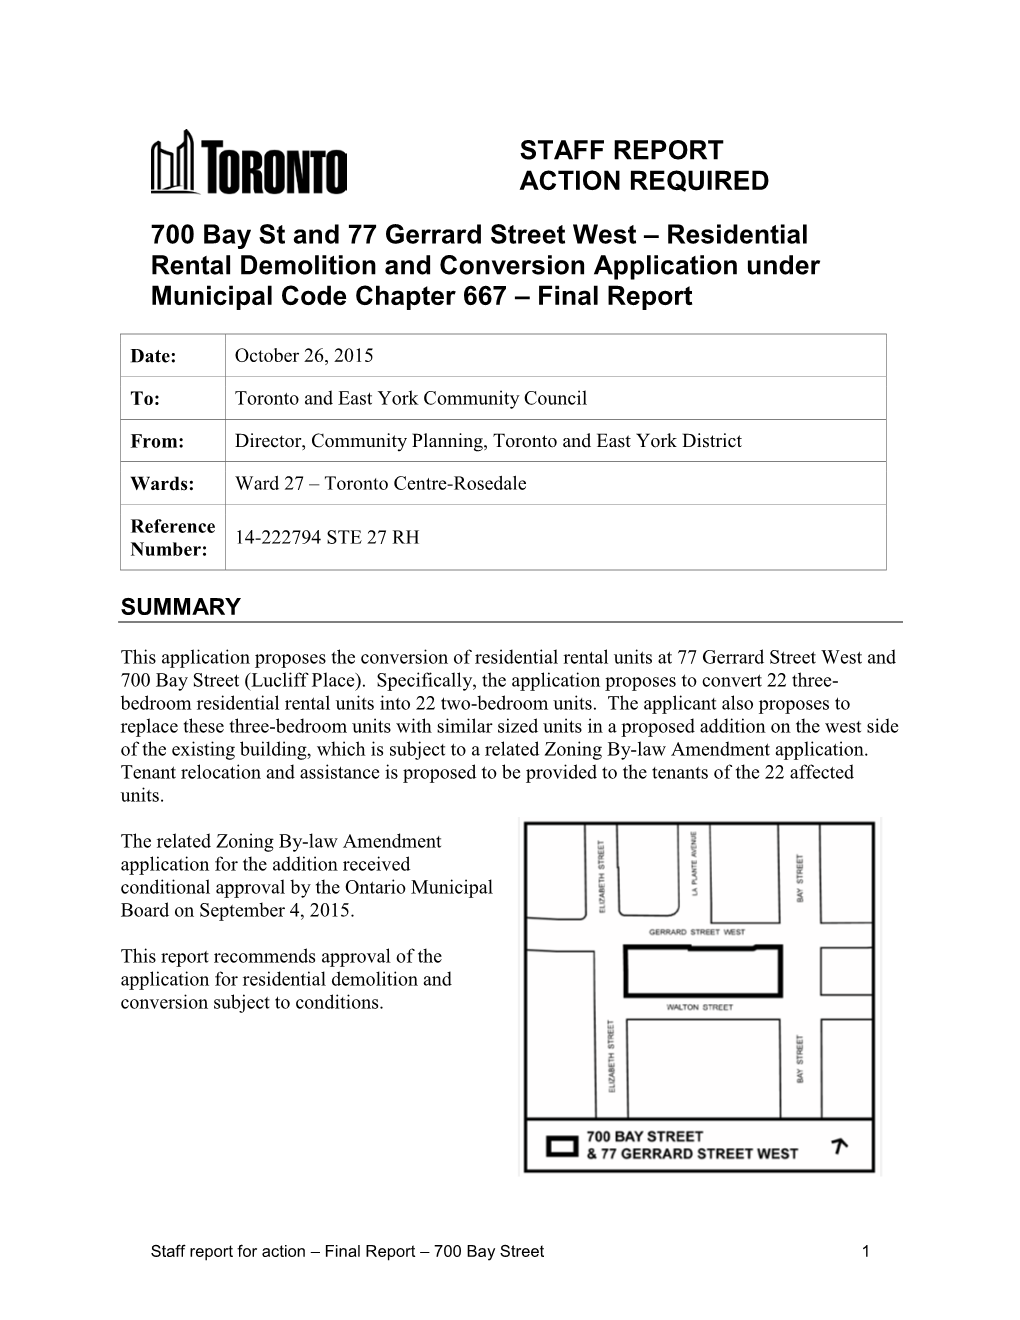 700 Bay St and 77 Gerrard Street West – Residential Rental Demolition and Conversion Application Under Municipal Code Chapter 667 – Final Report